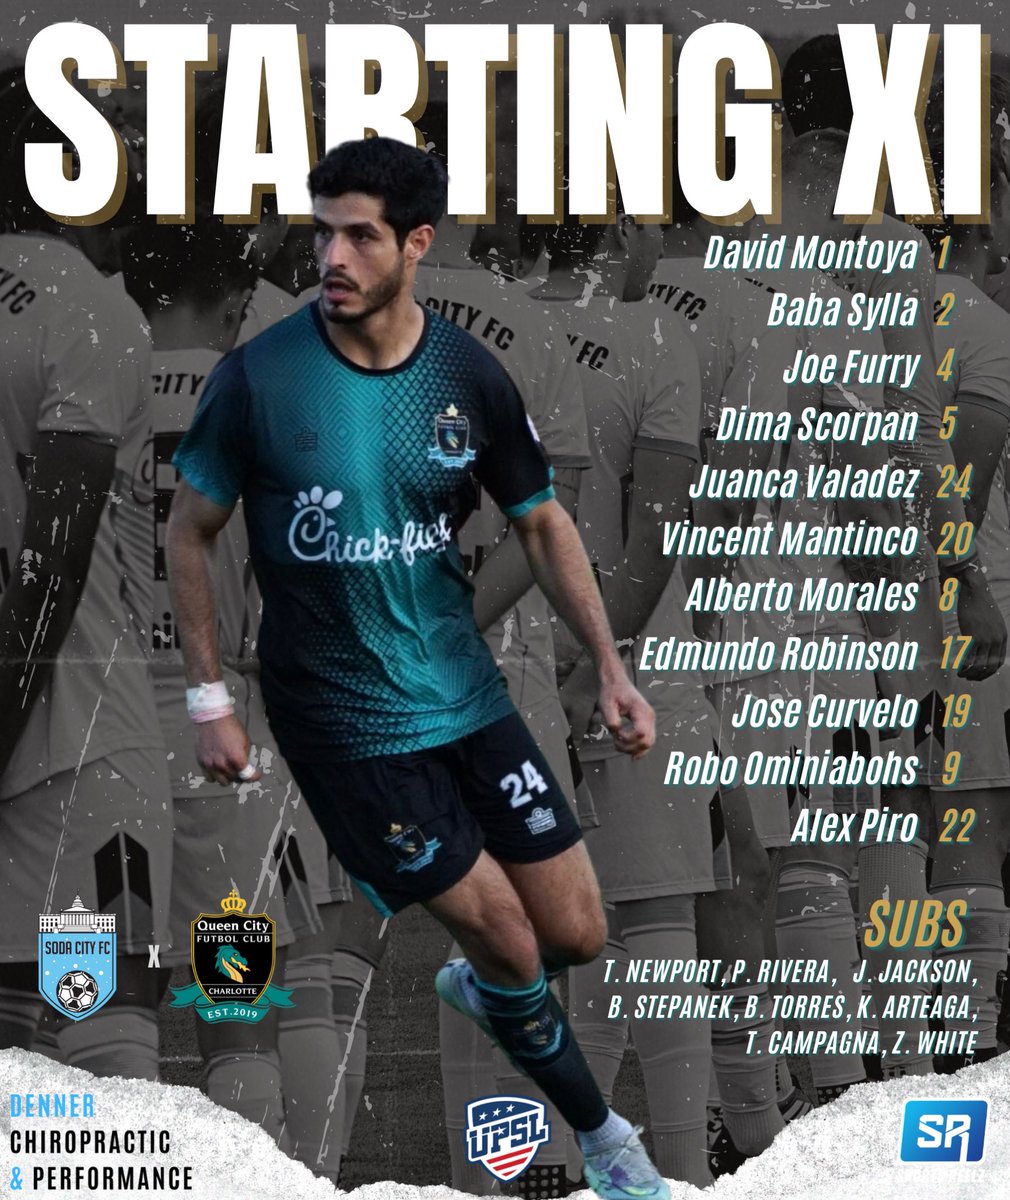 Here is today’s Starting XI against Soda City FC! 

#upsl #soccer #upslsoccer #queencity #startingxi #charlotte #queencity #matchday #playoffs  #feeltheburn #upinflames